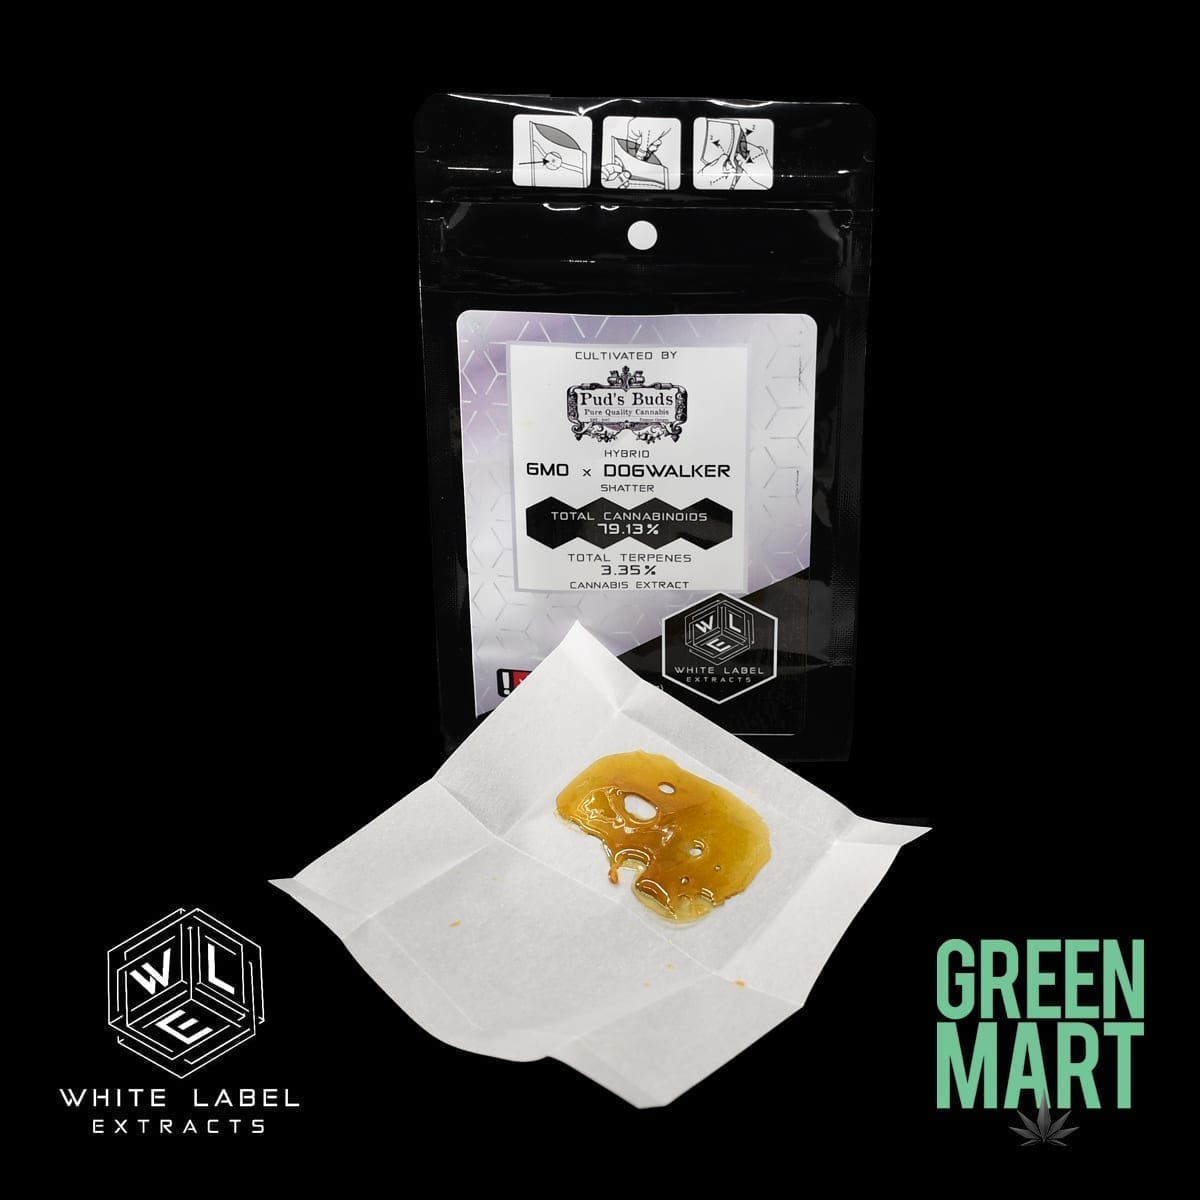 White Label Extracts - GMO x Dogwalker Shatter